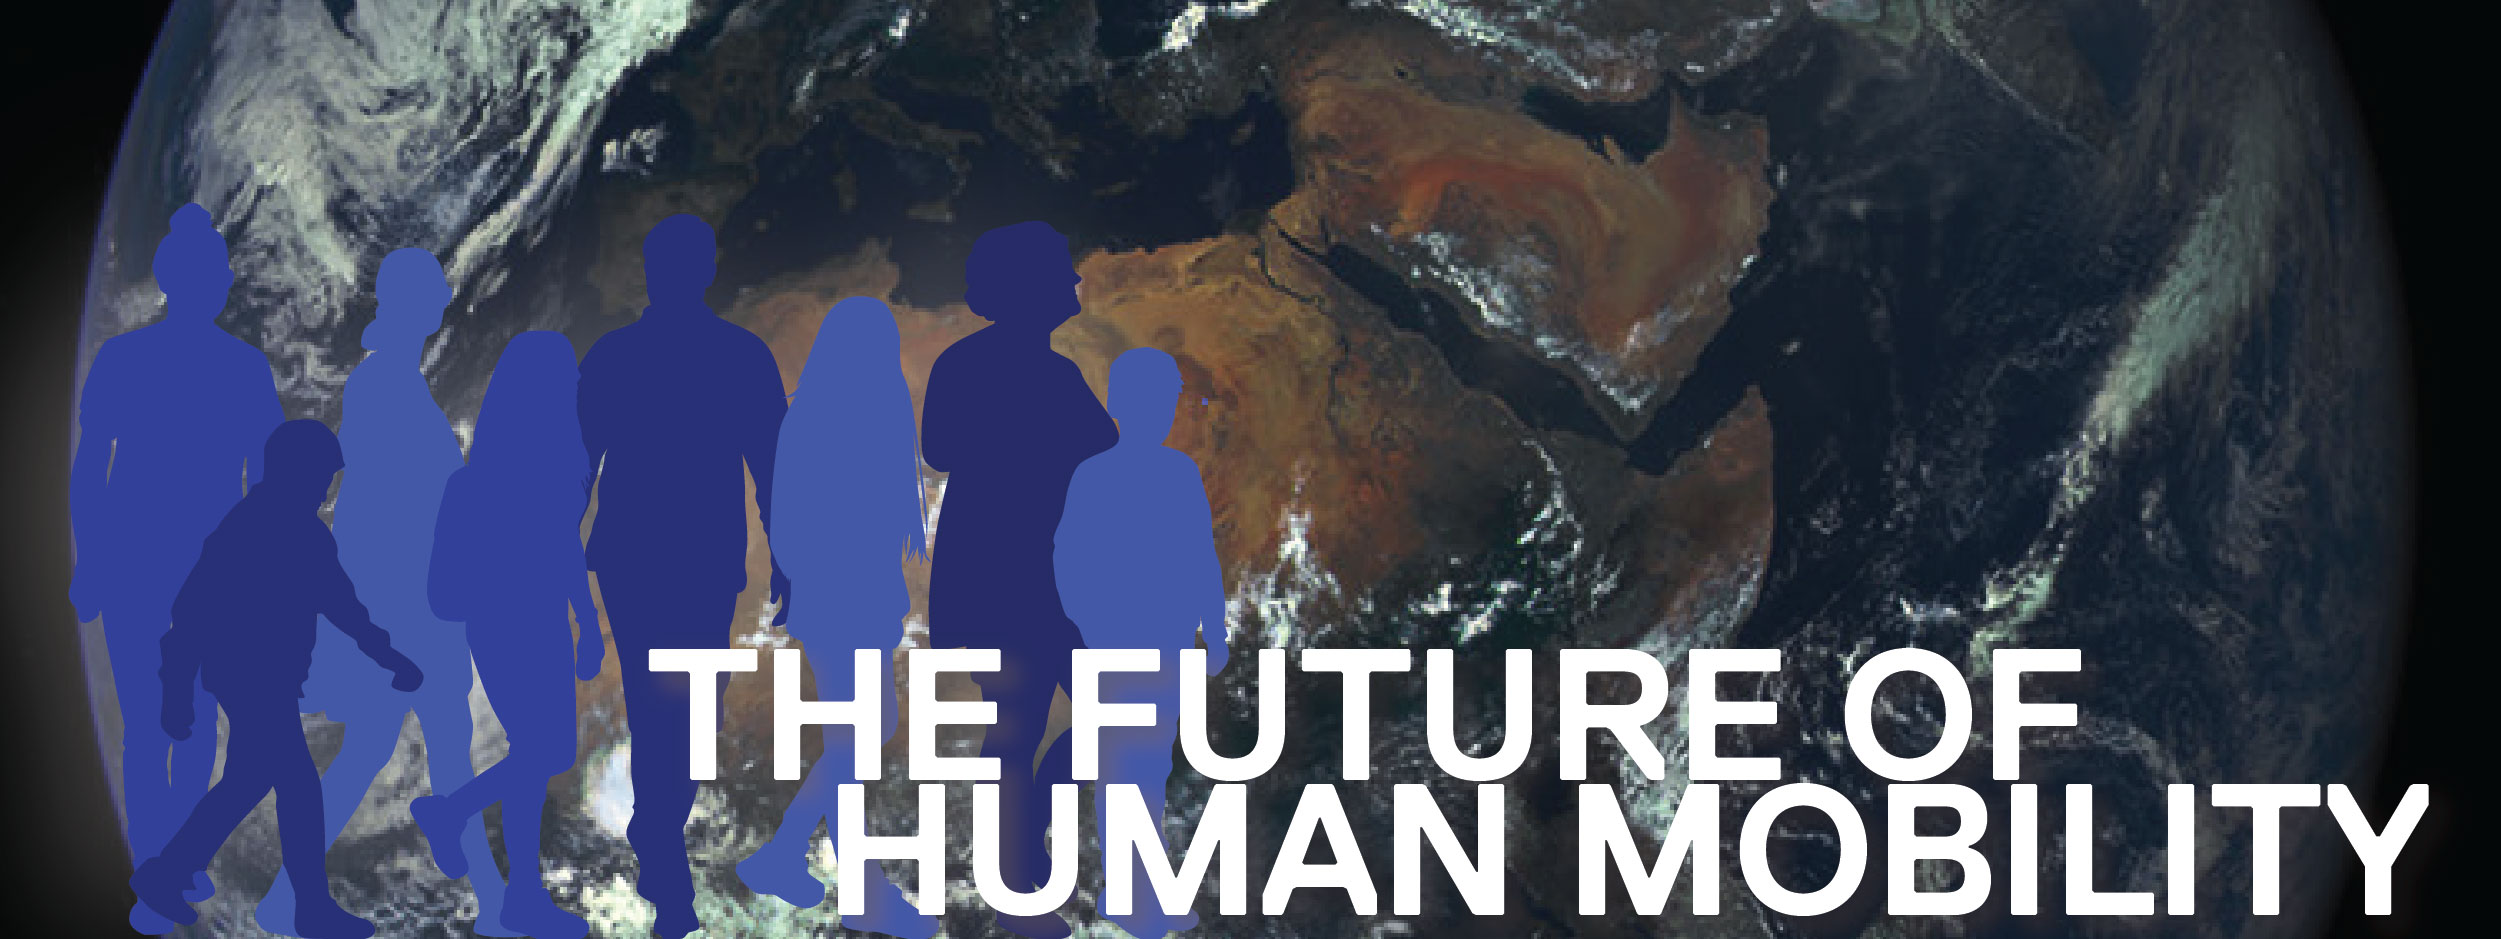 Future of human mobility banner